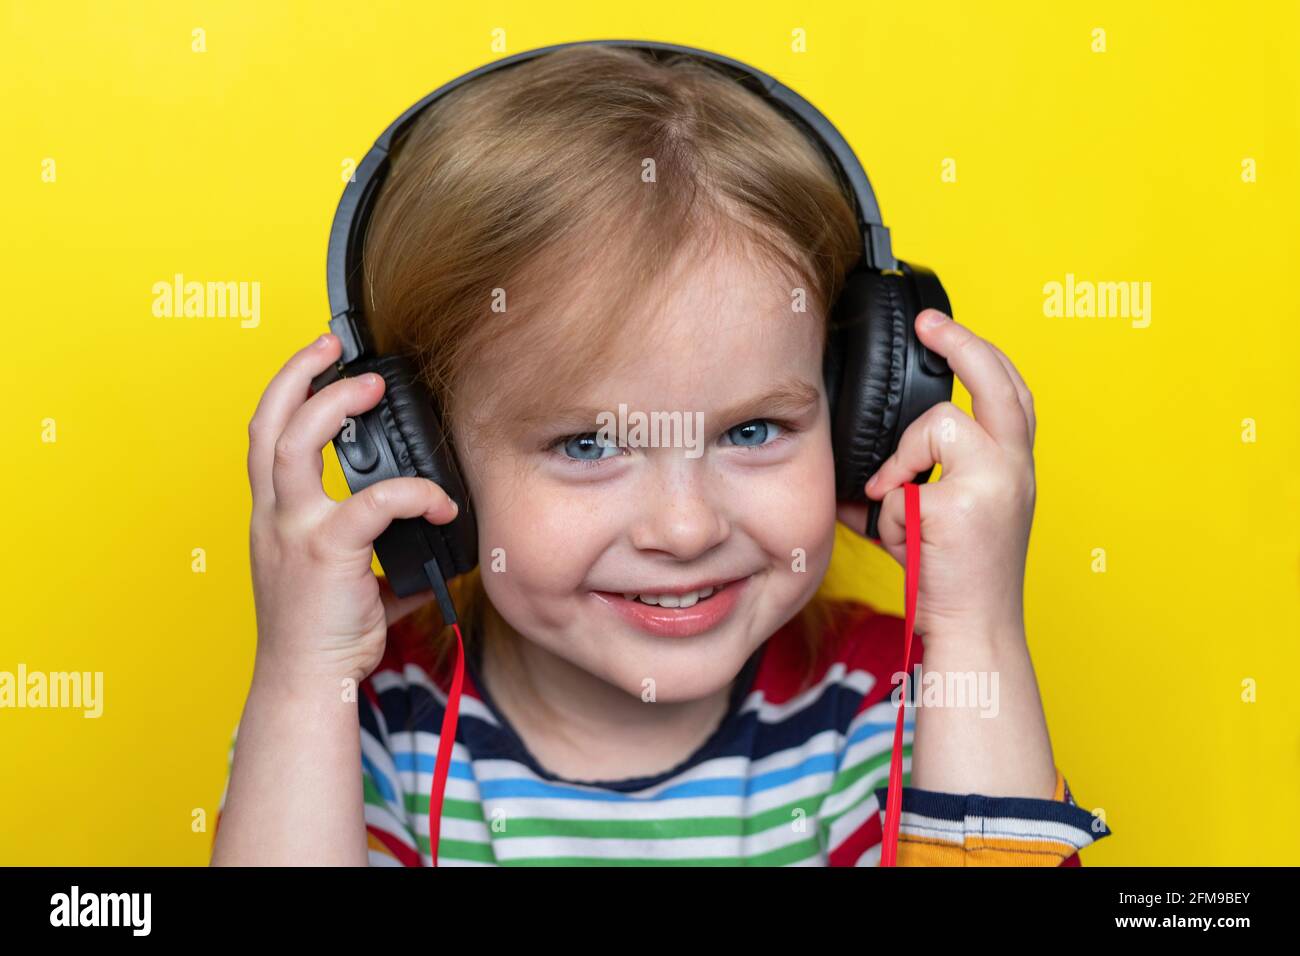 Happy smiling little child listening to music with large headphones, isolated on yellow background. Stock Photo